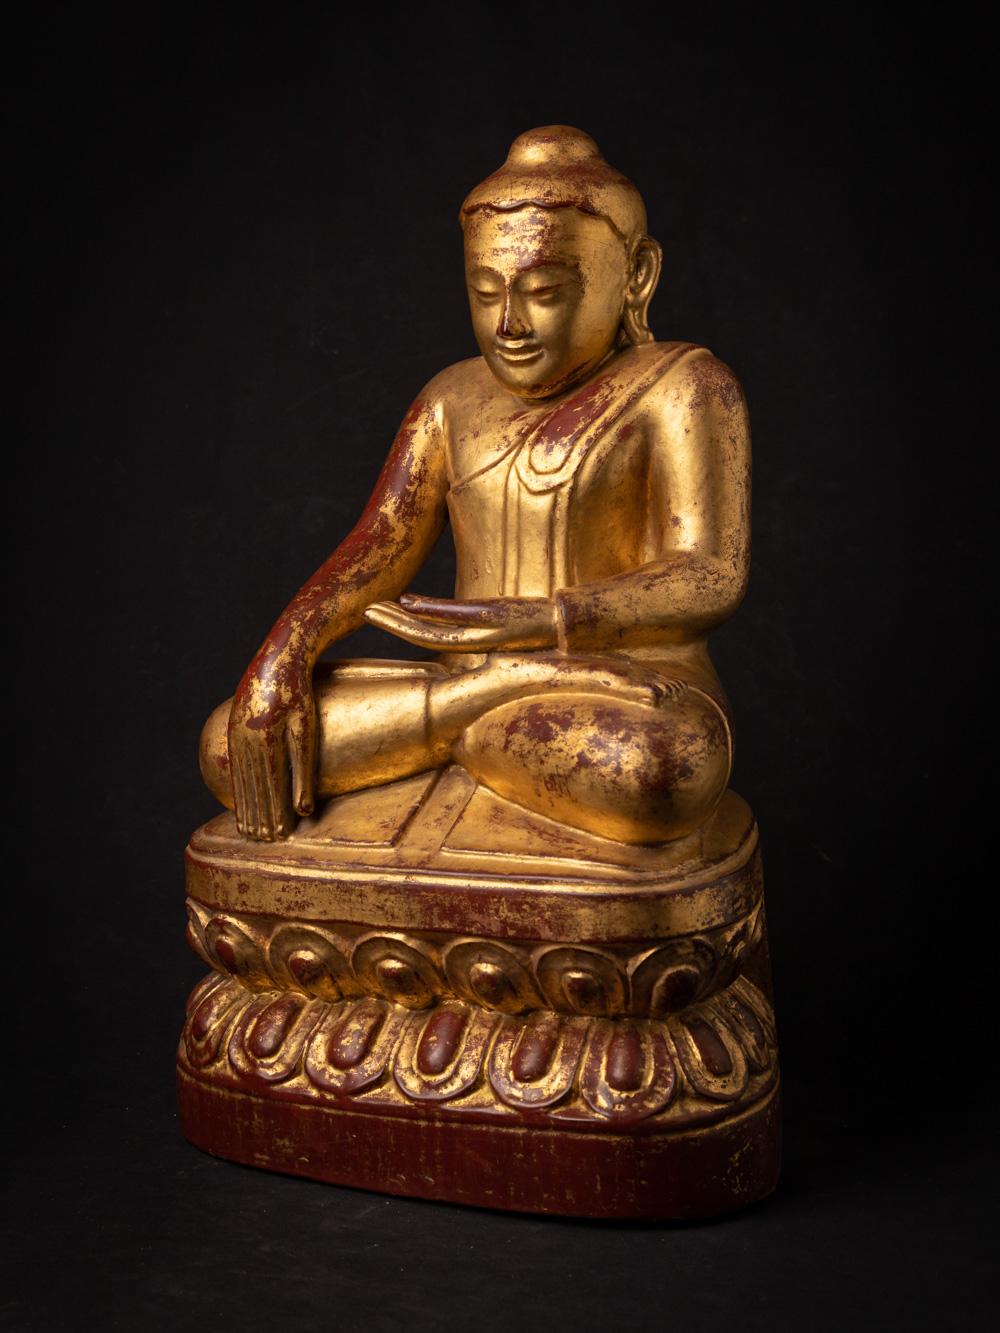 The special antique wooden Burmese Lotus Buddha is a truly extraordinary and sacred artifact originating from Burma. Crafted from wood and adorned with 24-karat gold gilding, this Buddha statue stands at 51 cm in height and measures 31.3 cm in width